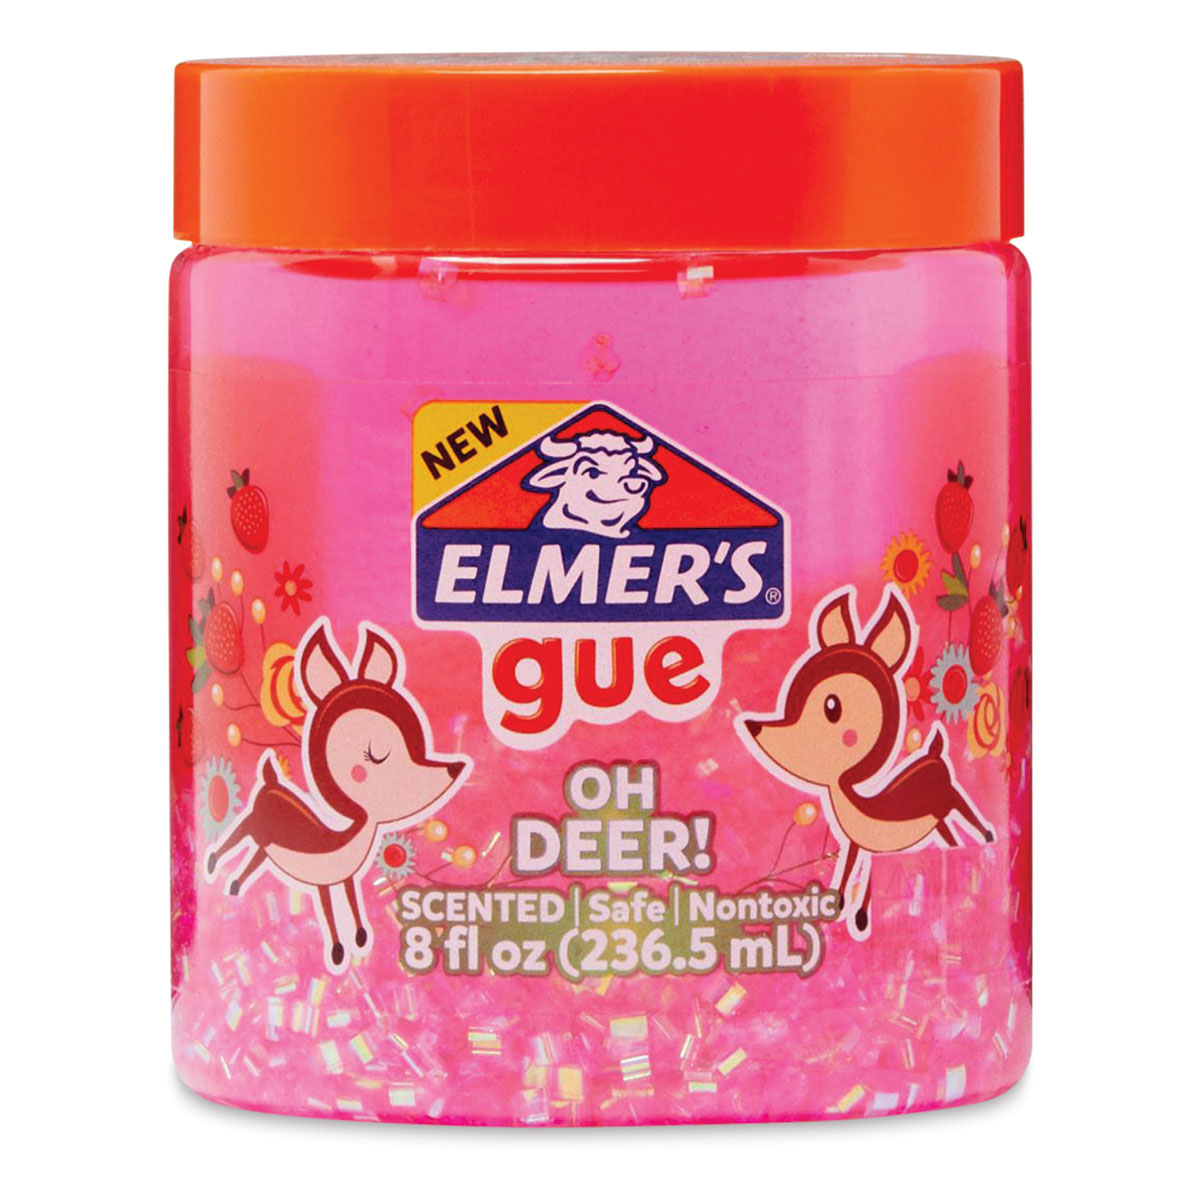 Elmer's GUE Pre-Made Slime (2-Pack) for $5.17 - Kids Activities